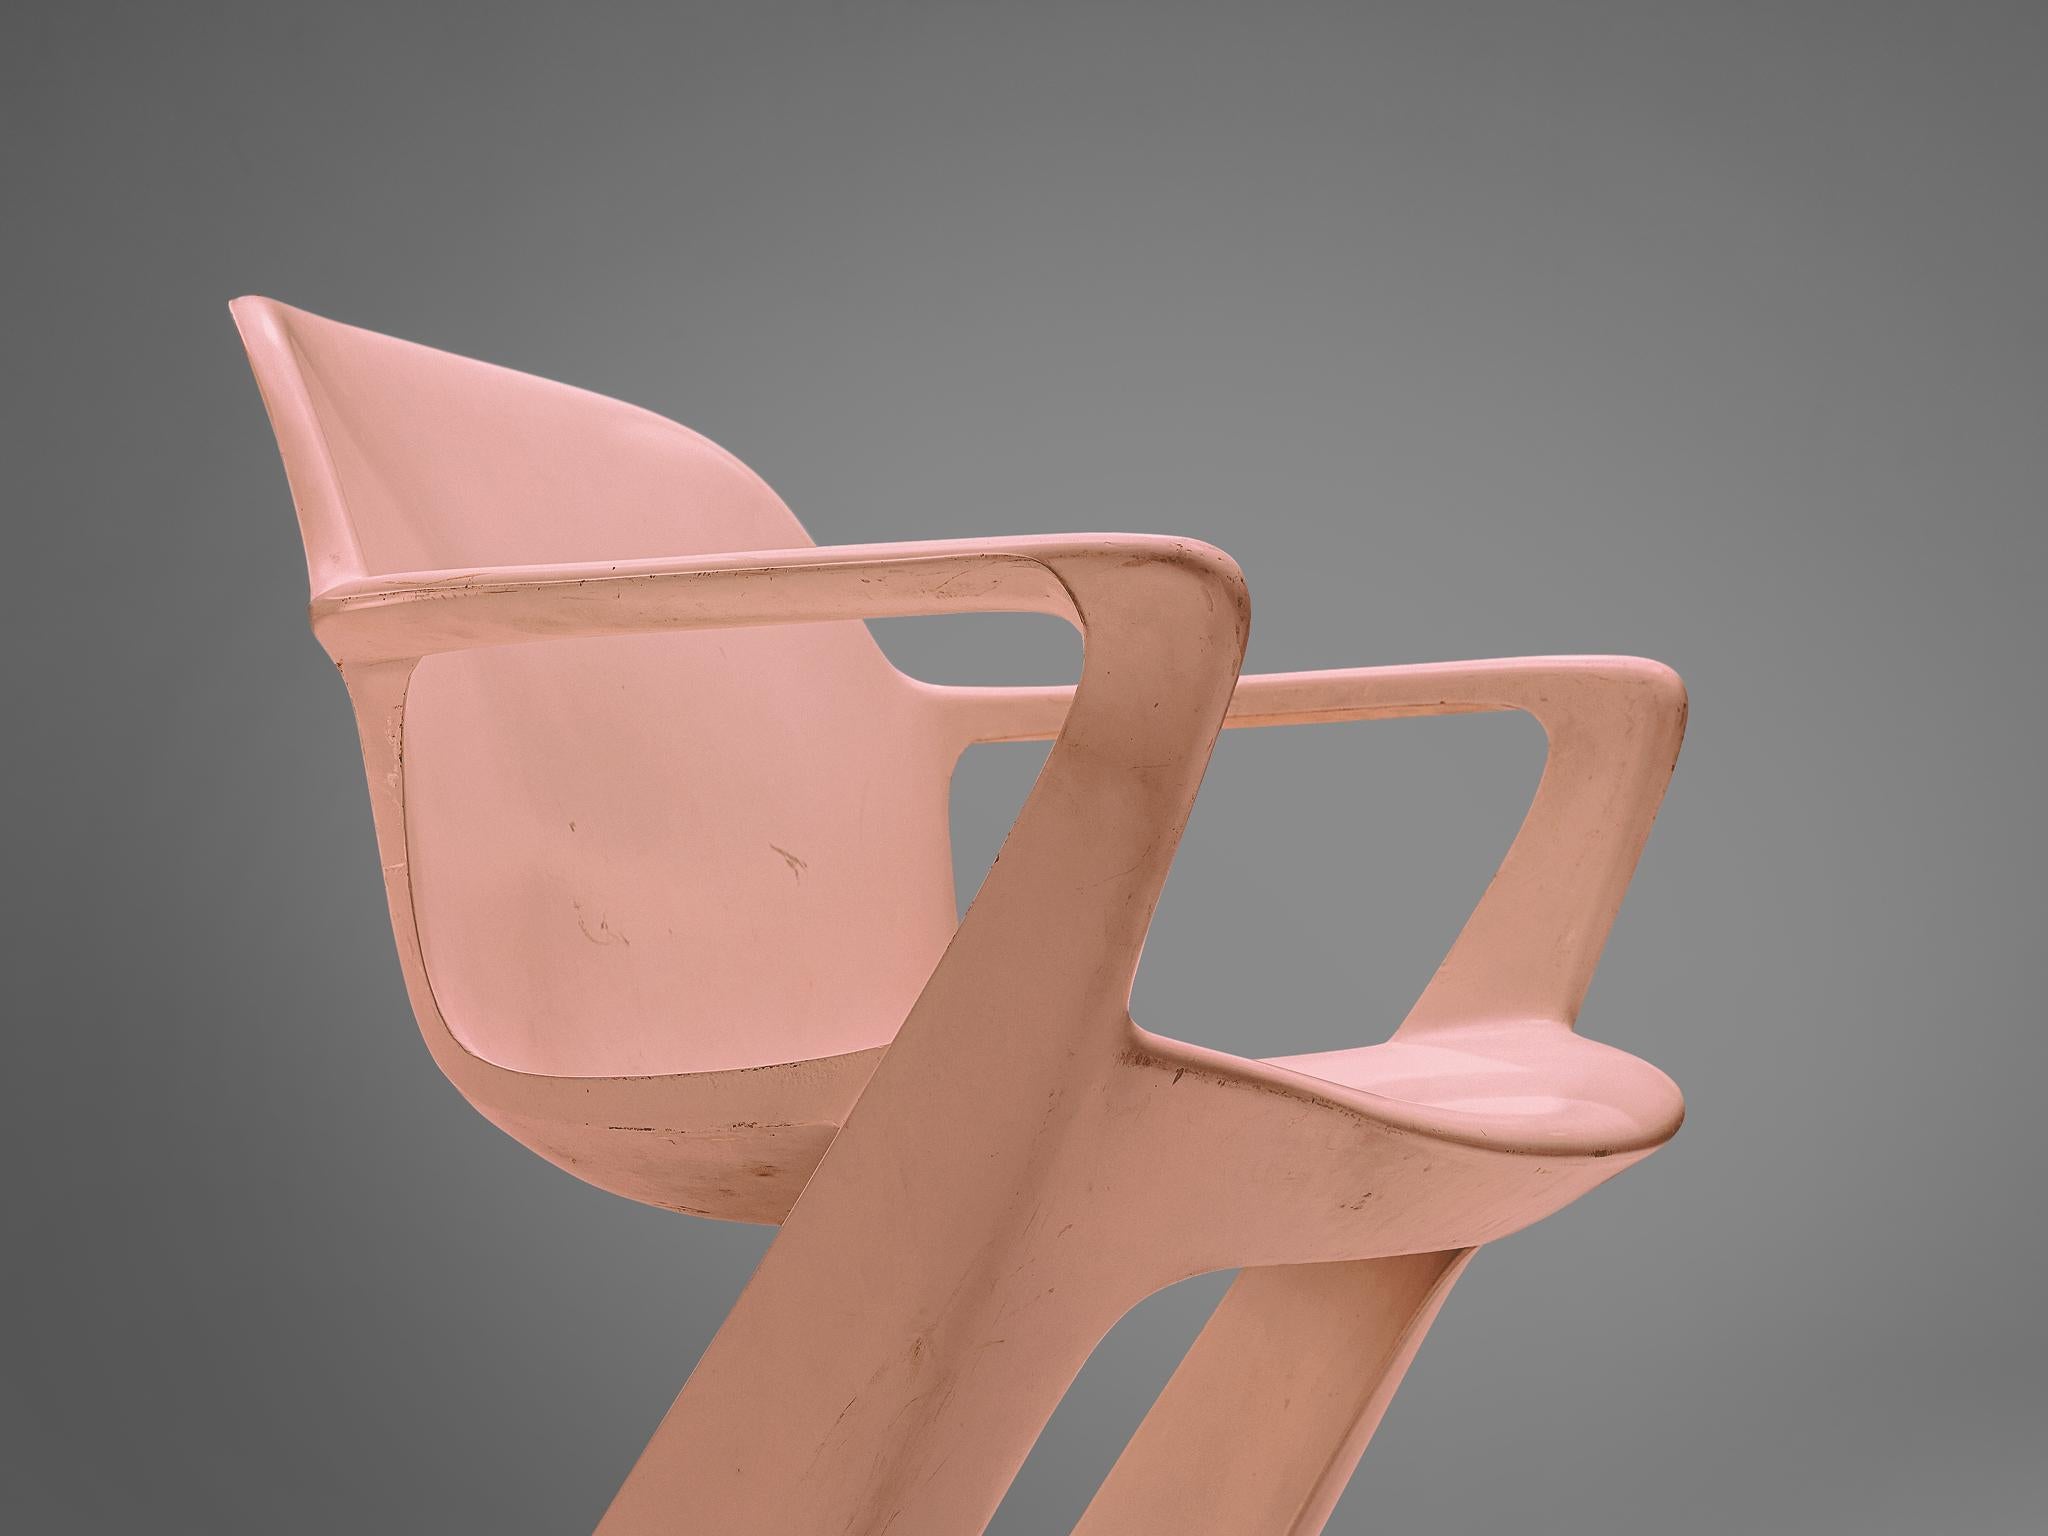 Ernst Moeckl 'Kangaroo' Dining Chairs in Soft Pink For Sale 1